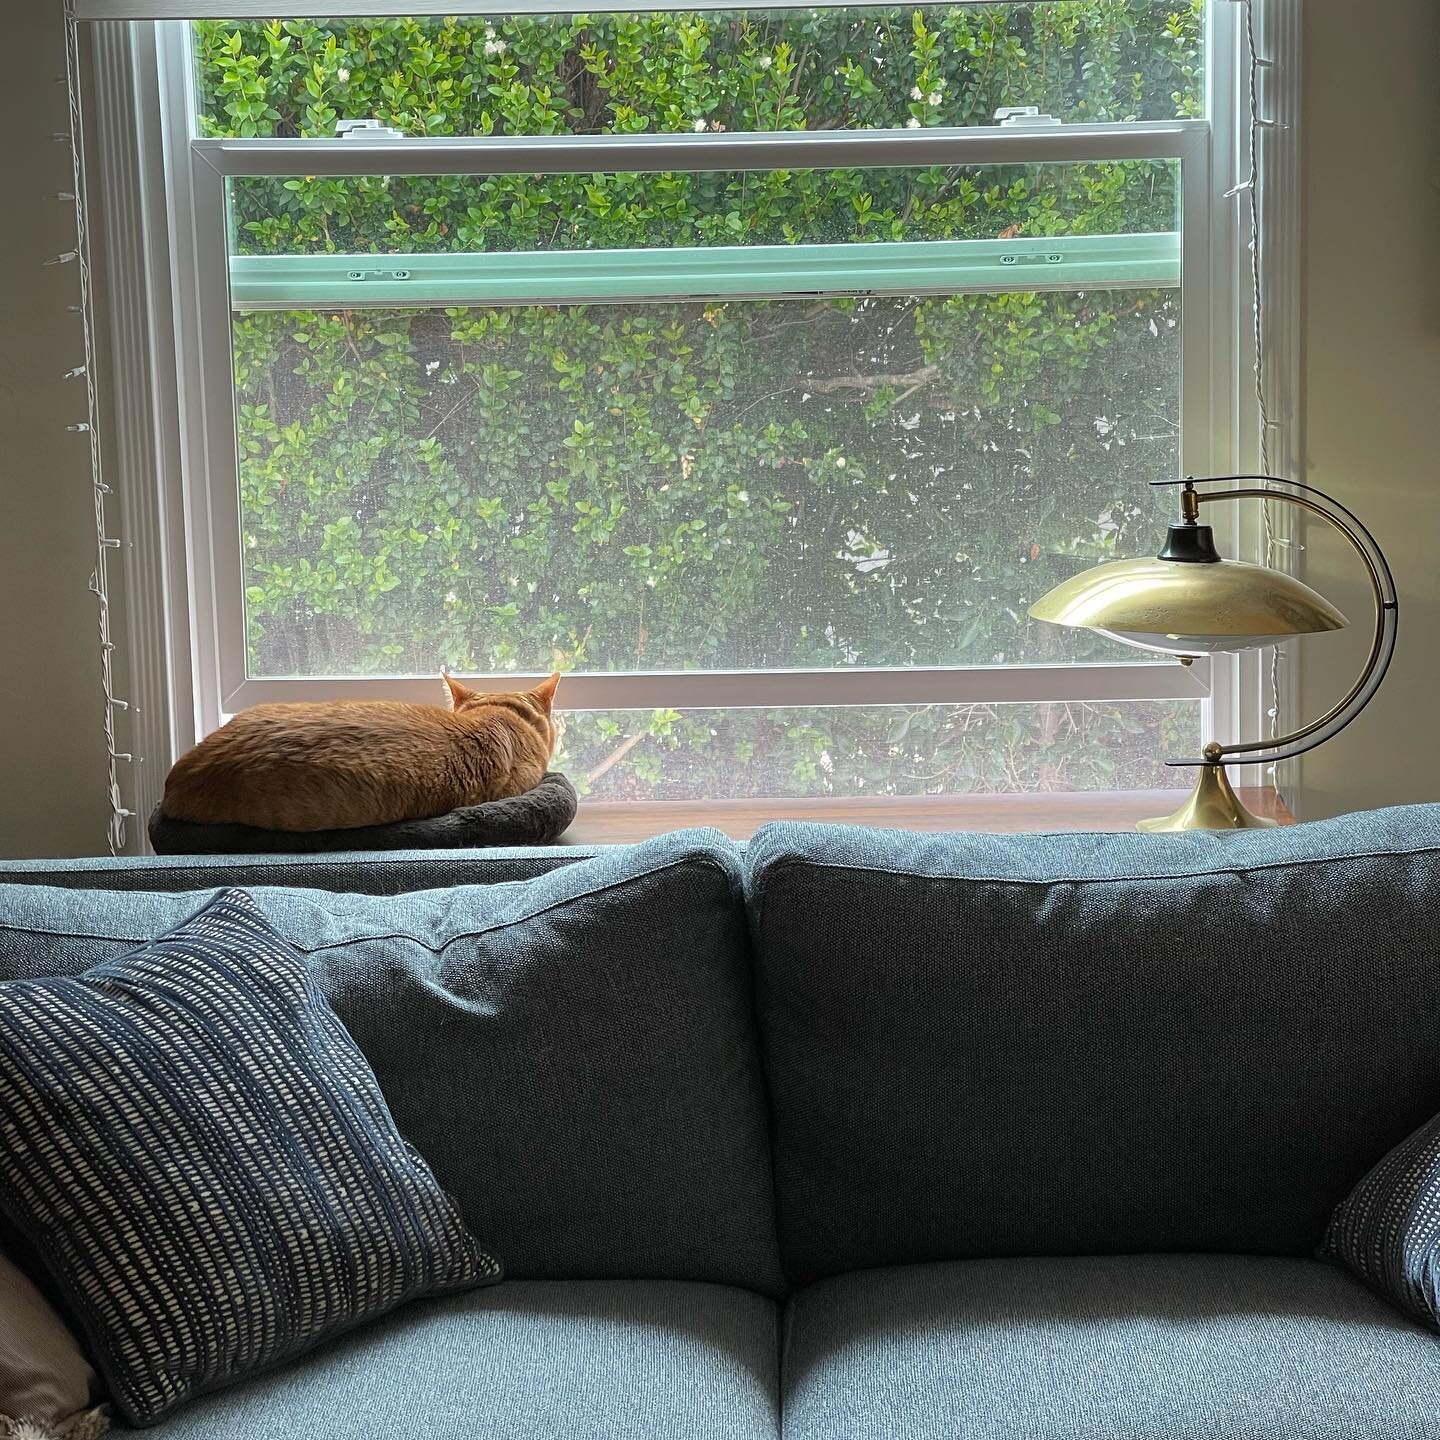 That window is only allowed to be open four inches wide since the day Richard broke through the screen to go fight another cat. #indoorcatproblems #caturday #richardiloveyou